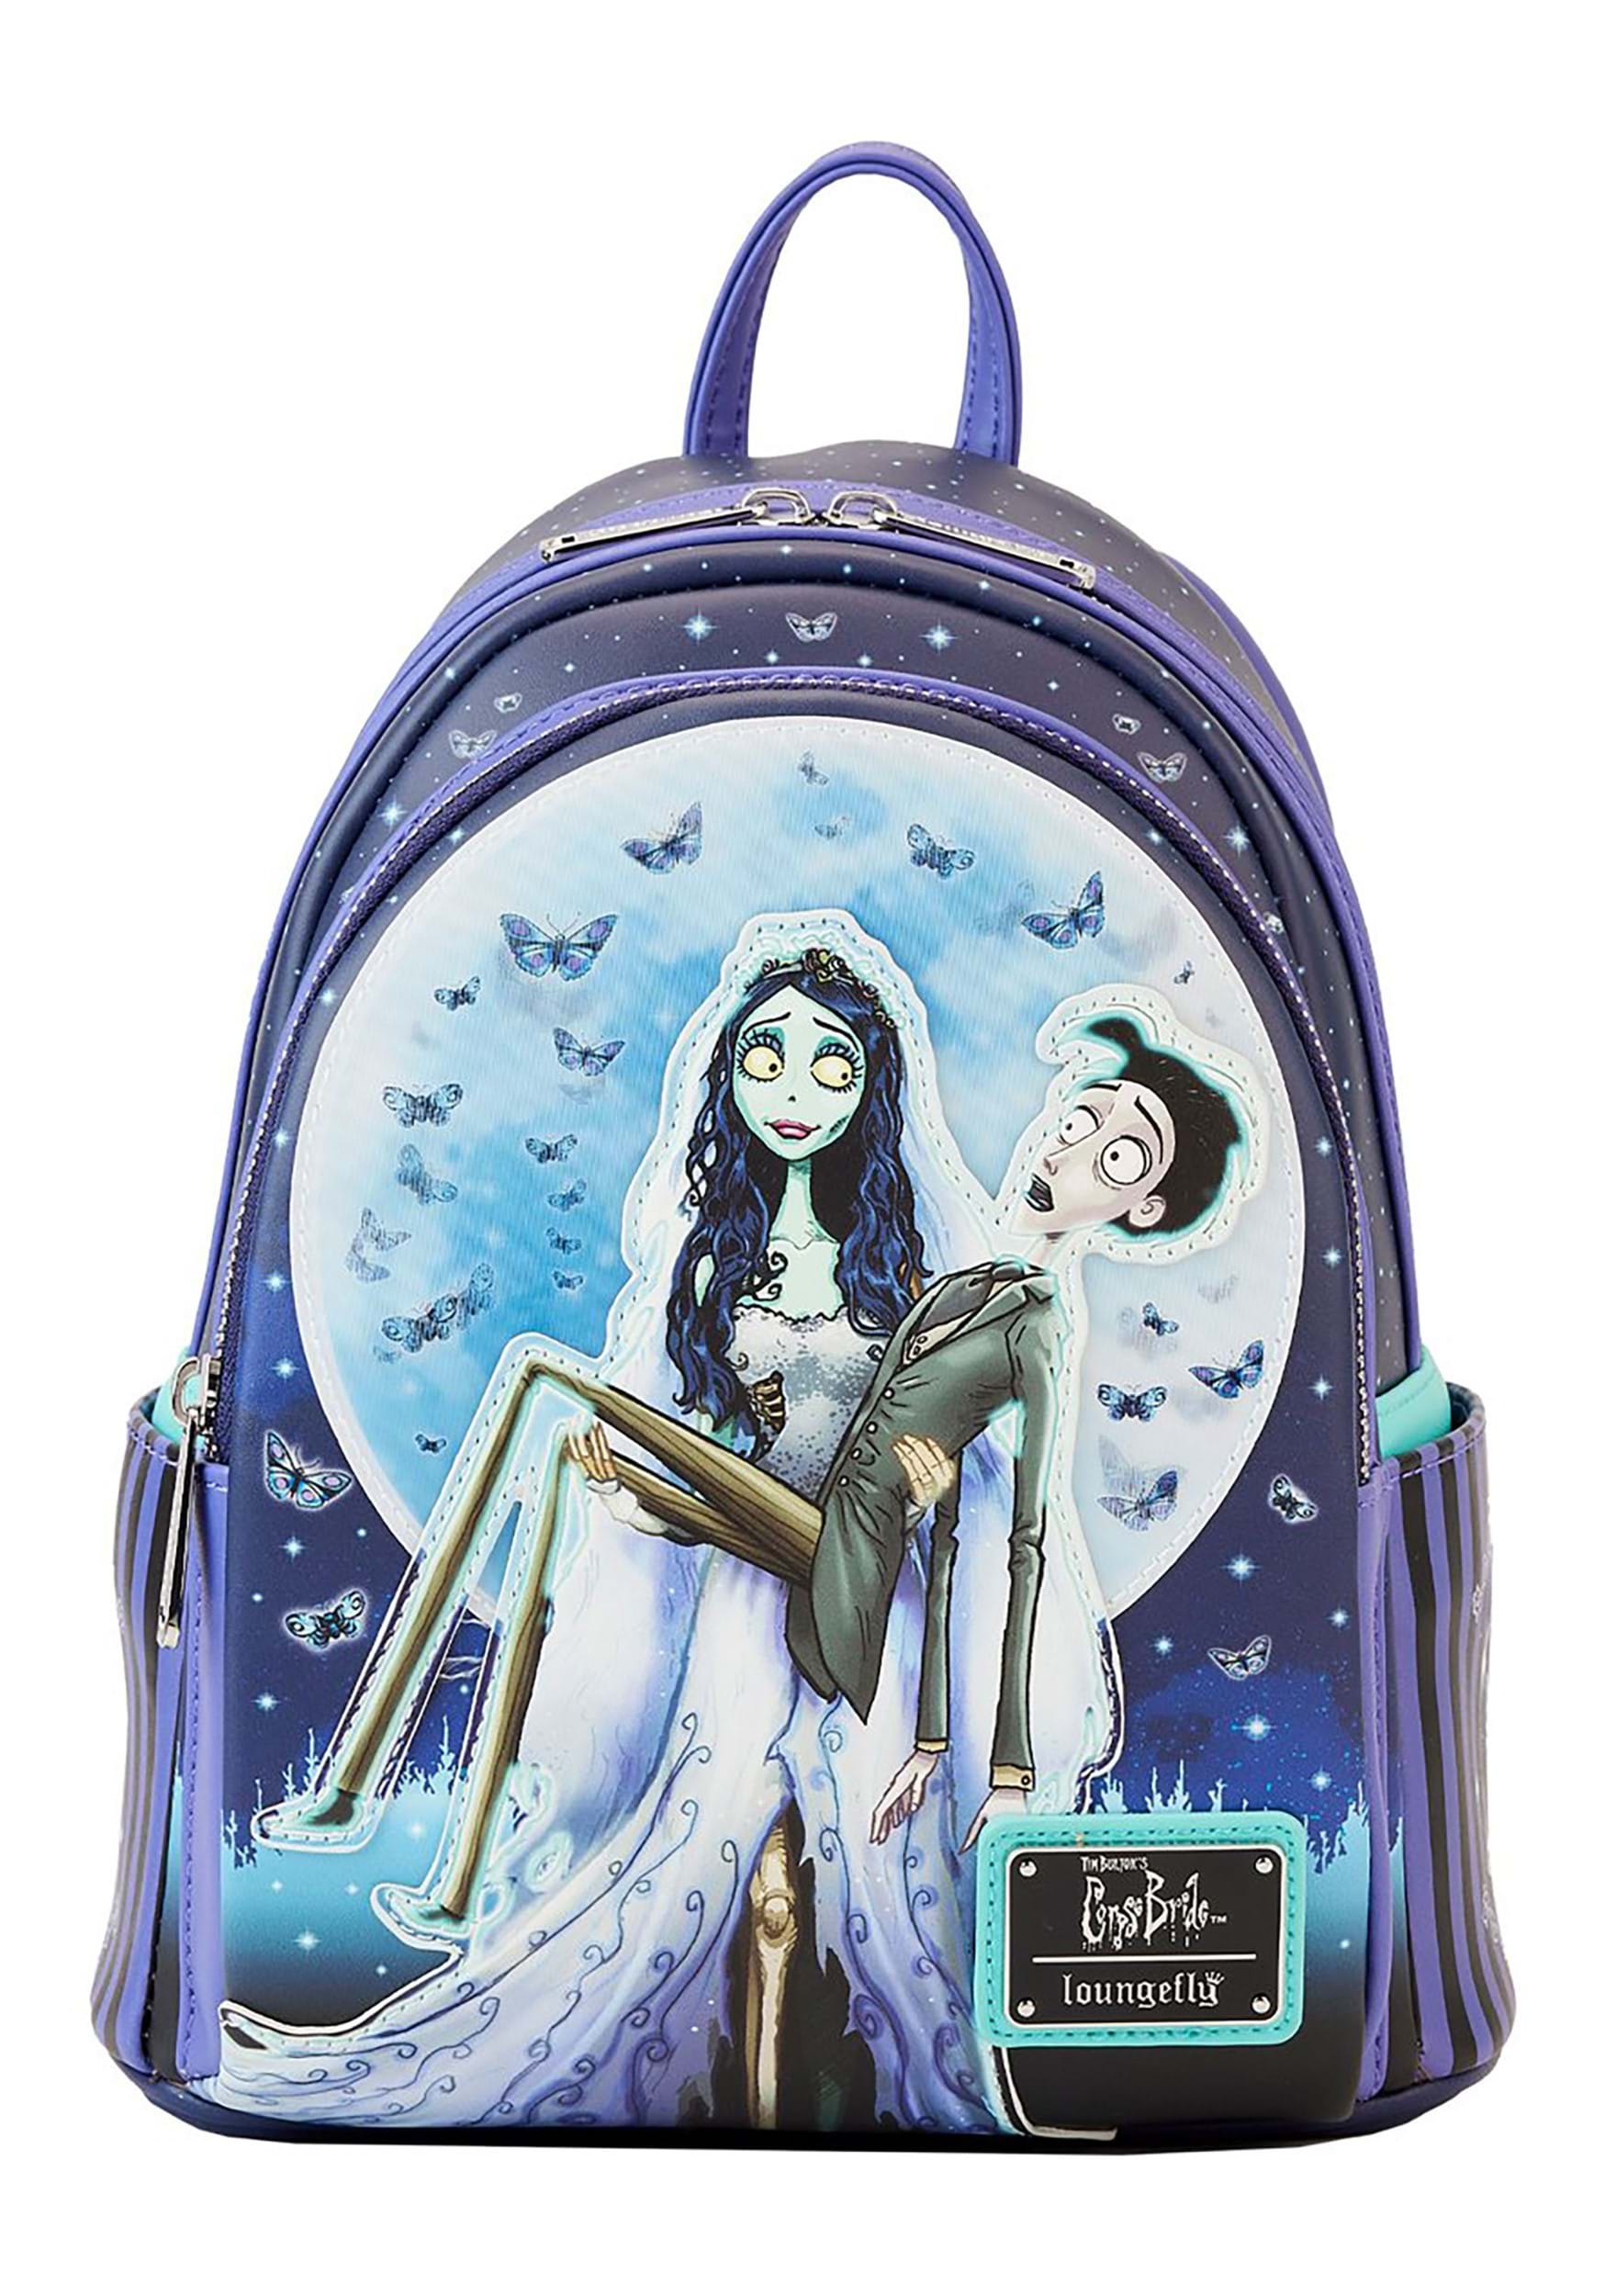 Warner Brothers Corpse Bride Moon Mini Backpack by Loungefly